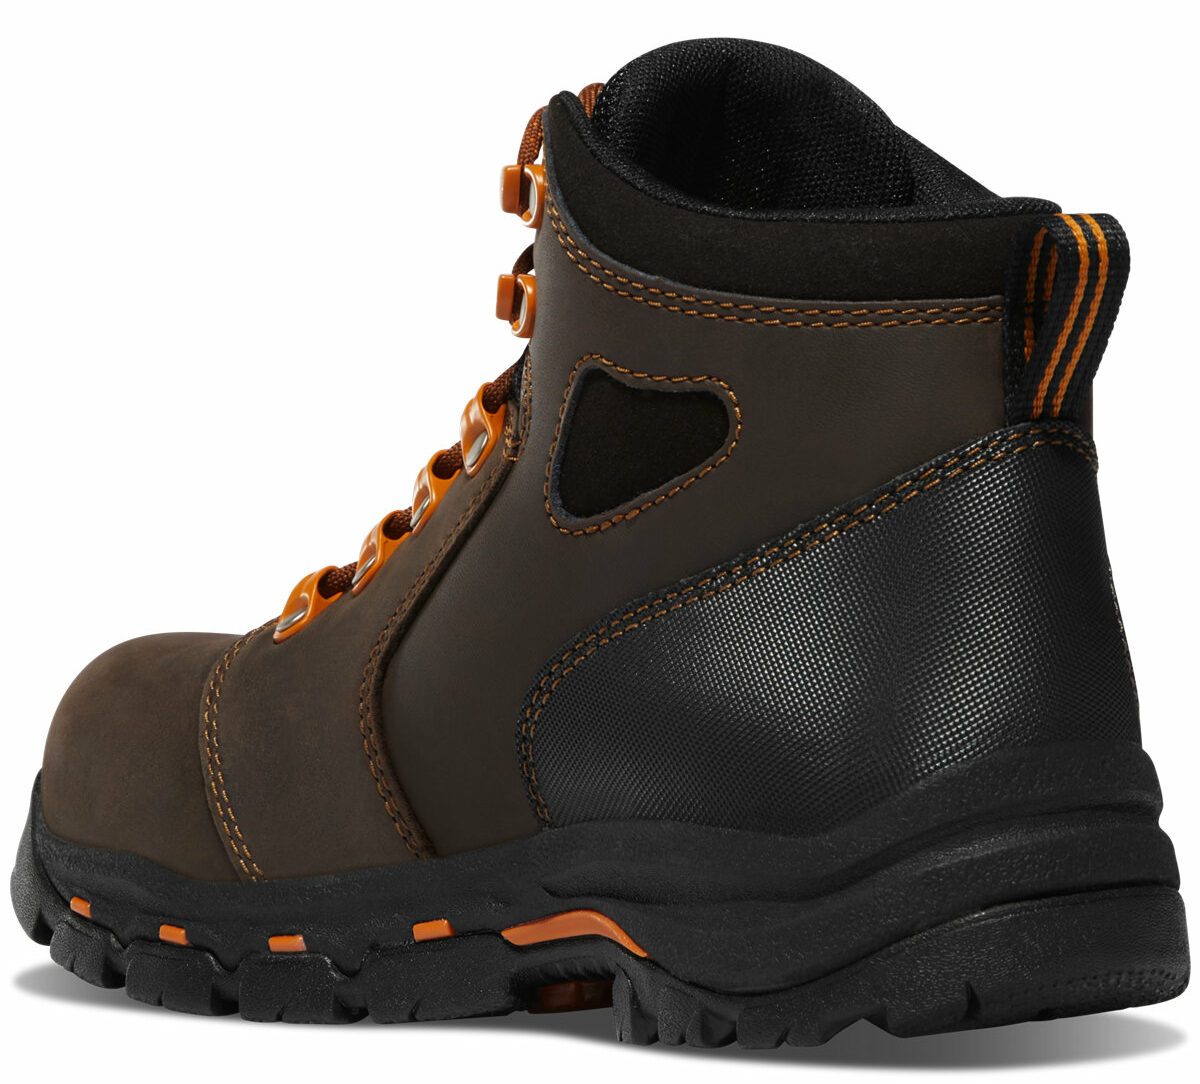 Danner vicious work boots